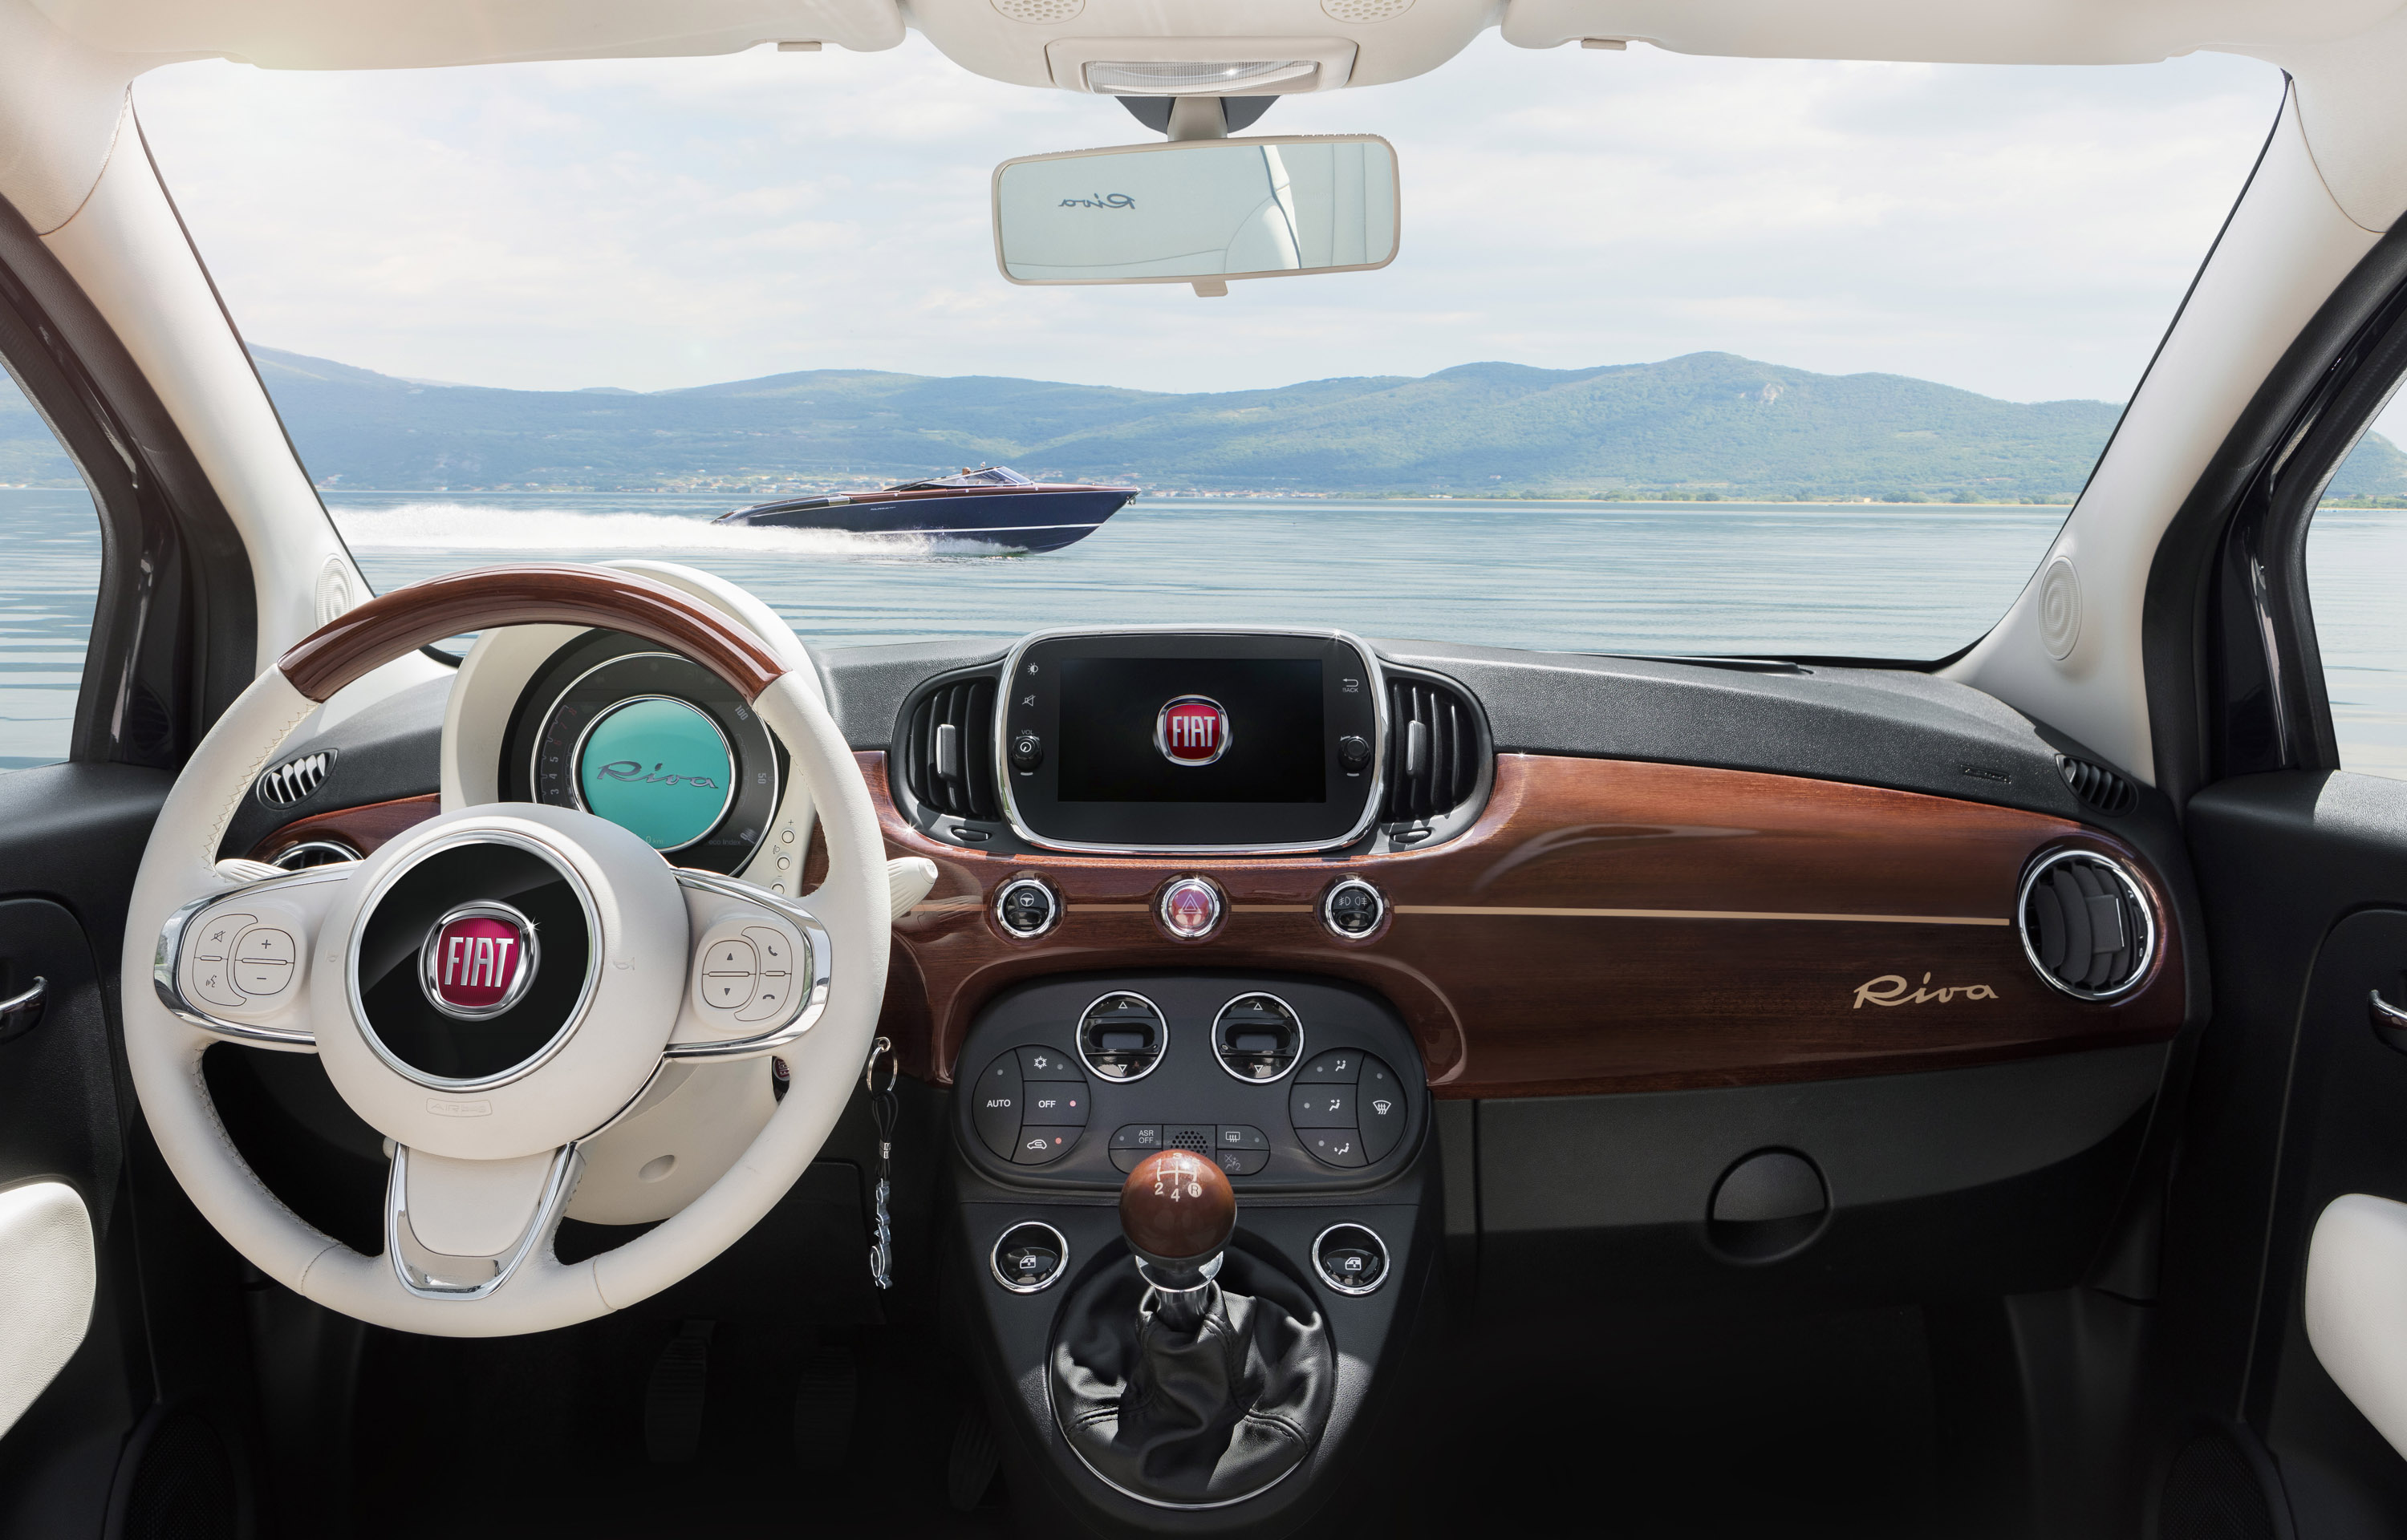 Fiat Reveals The Special And Limited 500 Riva Model